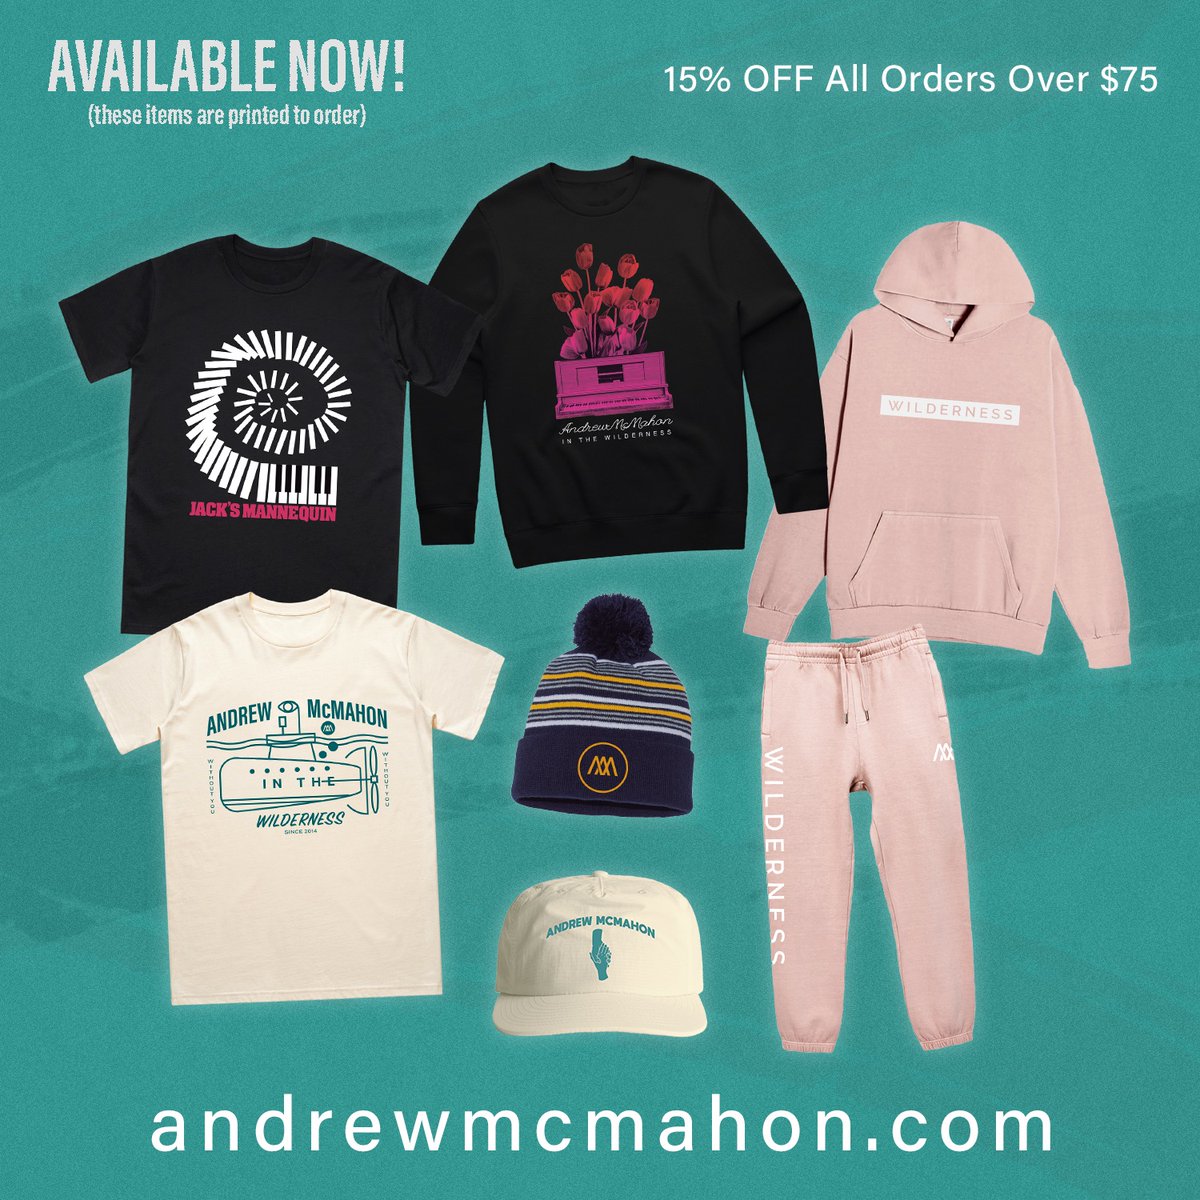 This week, grab 15% off orders over $75 - including a ton of new merch! andrewmcmahon.com/collections/fr…